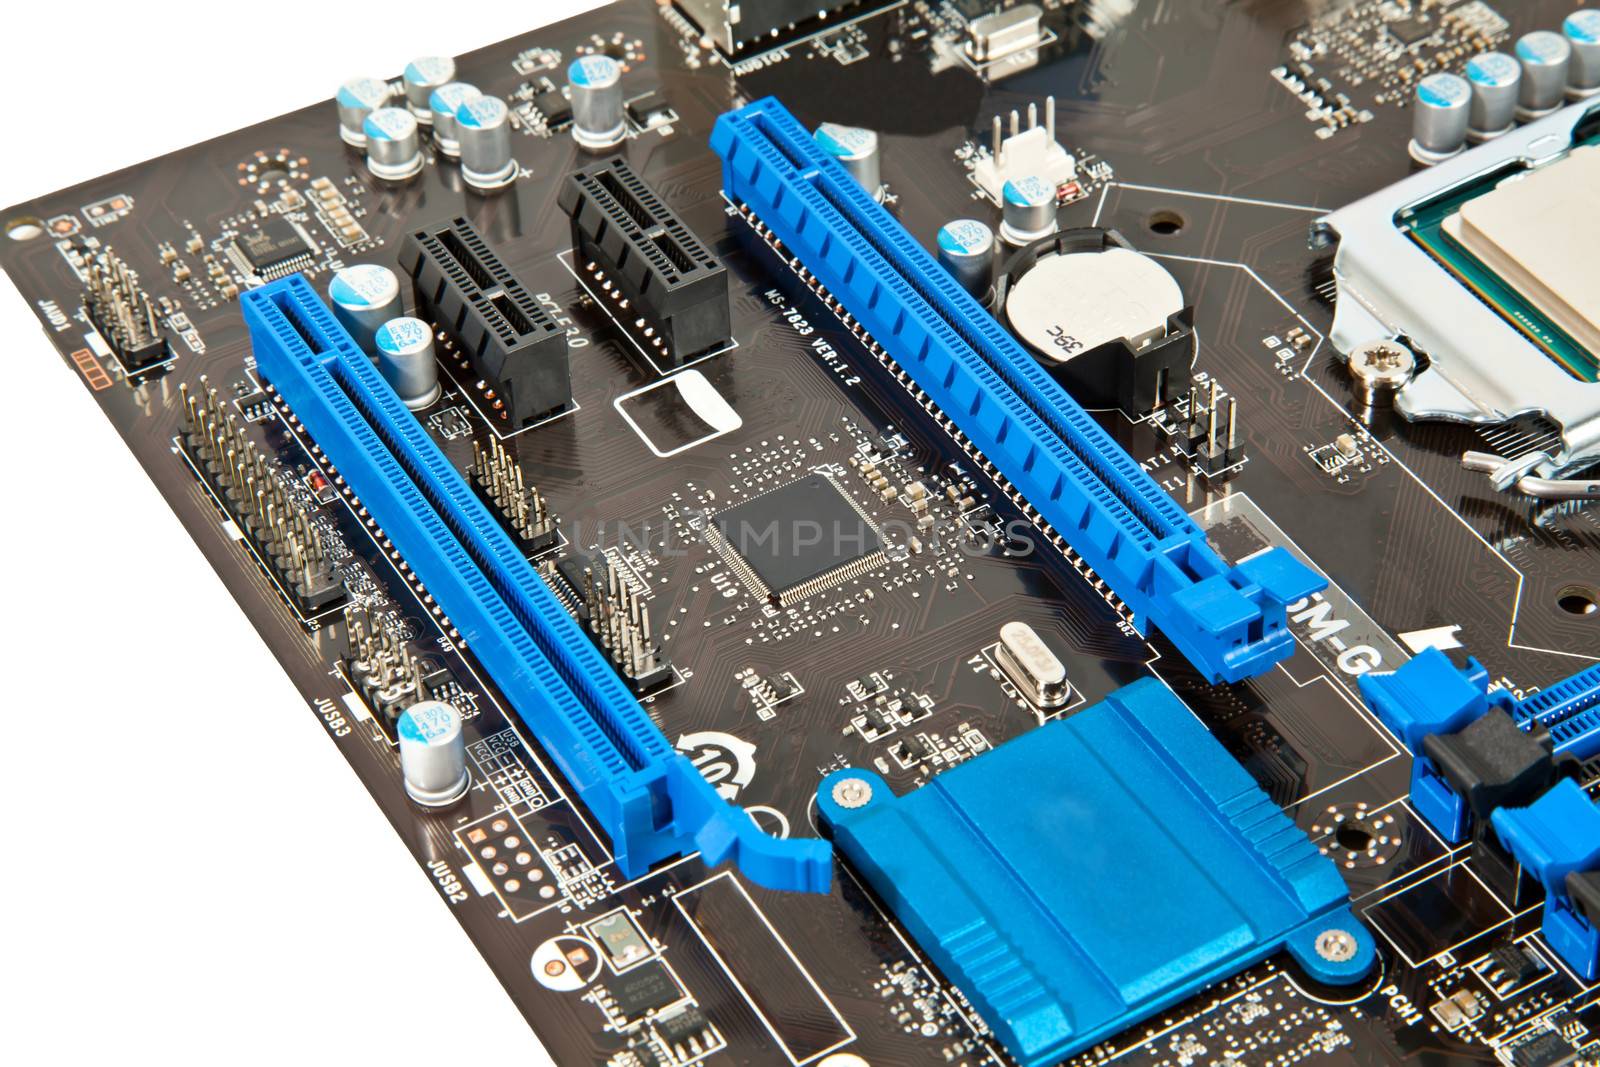 Part of laptop motherboard by RawGroup